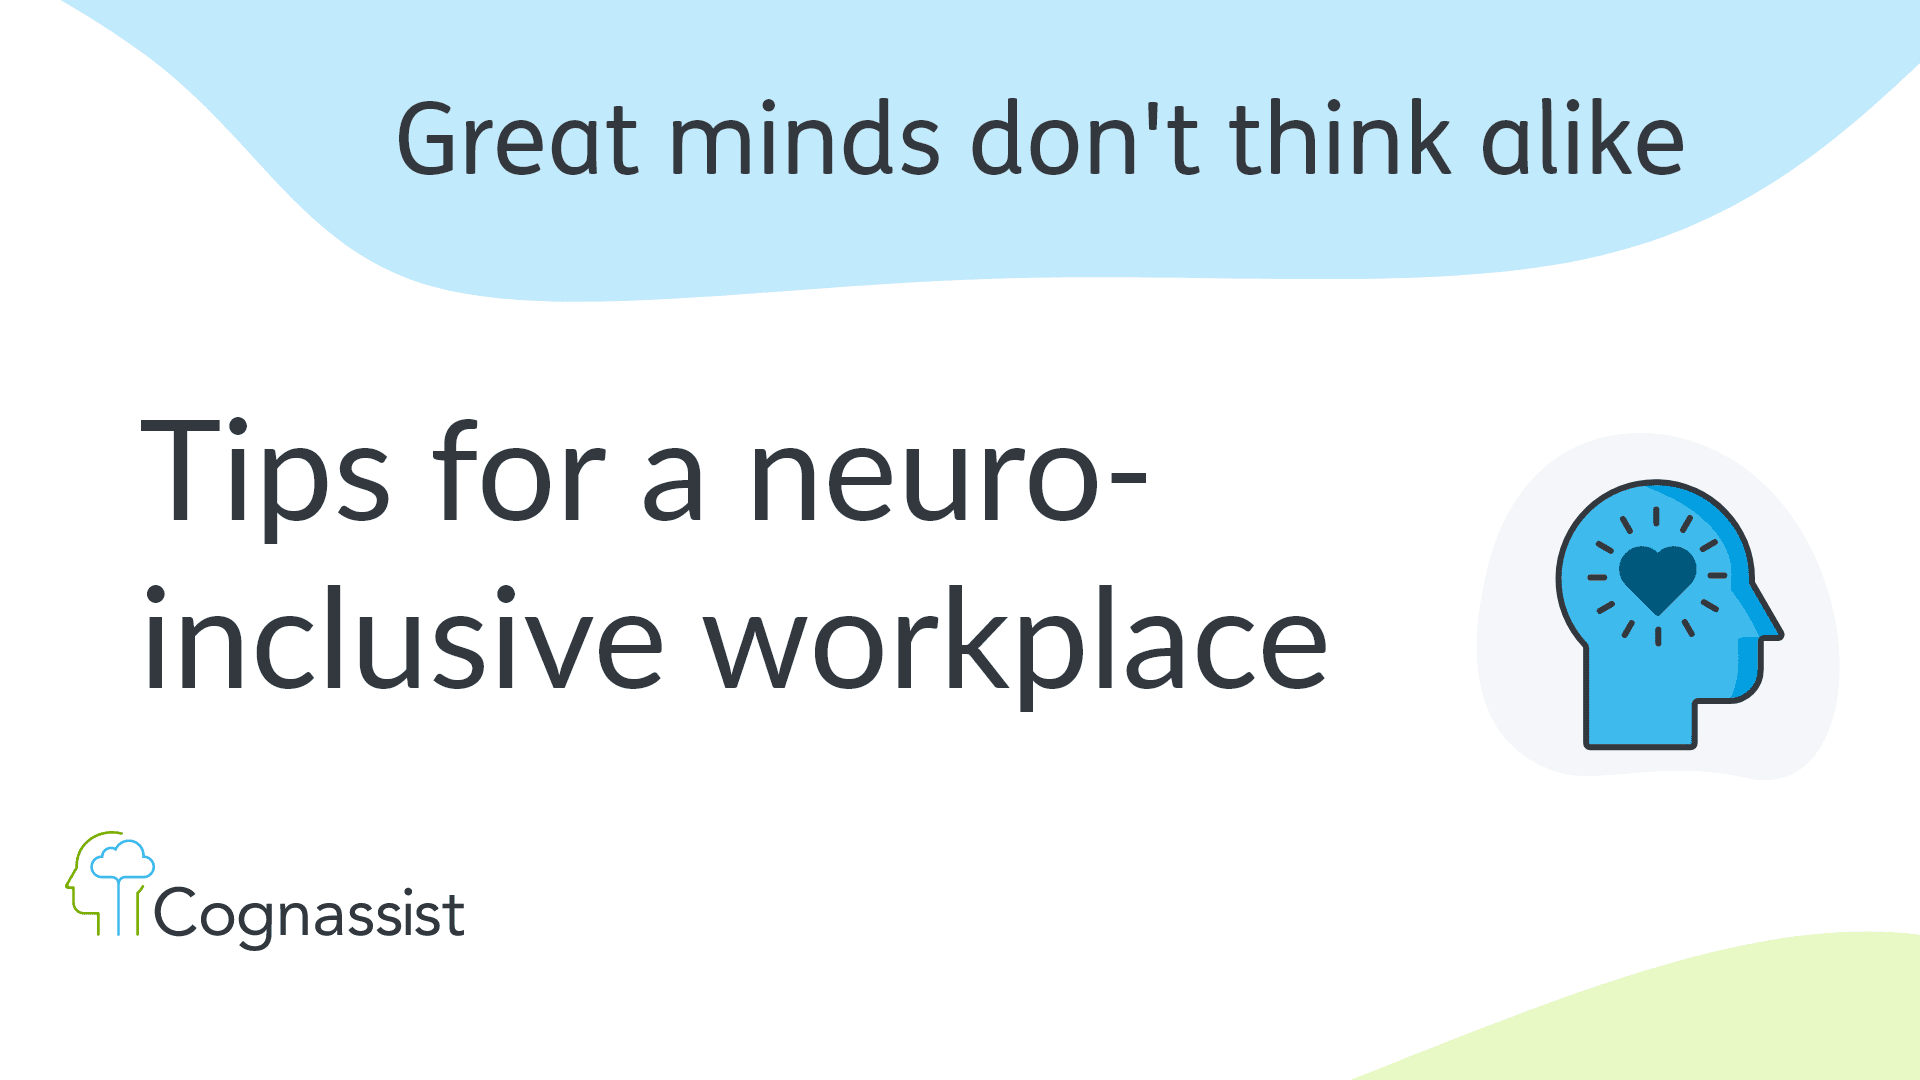 Tips for a neuro-inclusive workplace